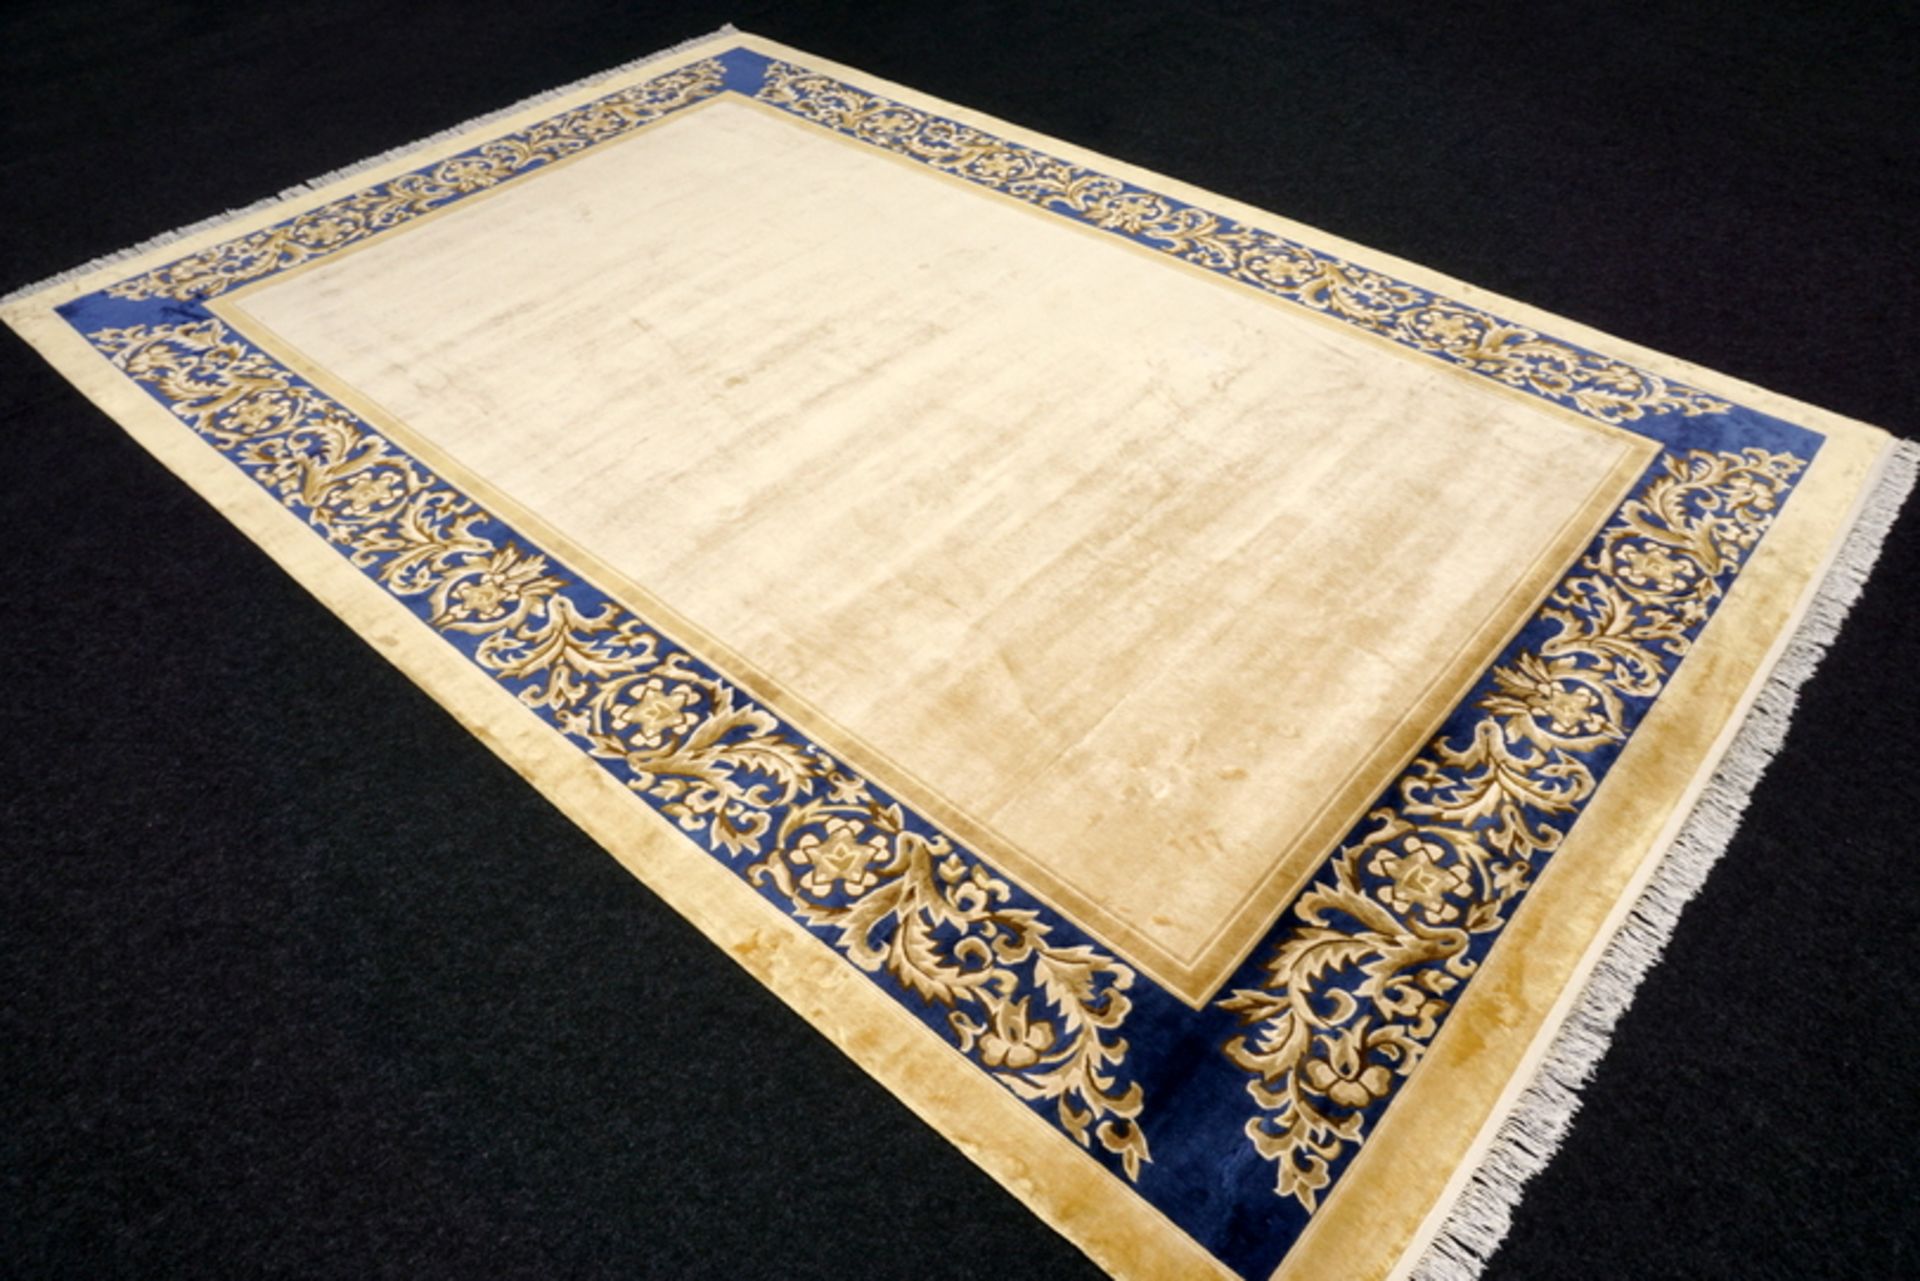 A Chinese Silk Carpet, Tientsin, Silk On Silk Foundation The Plain Ivory Field With A Blue Border